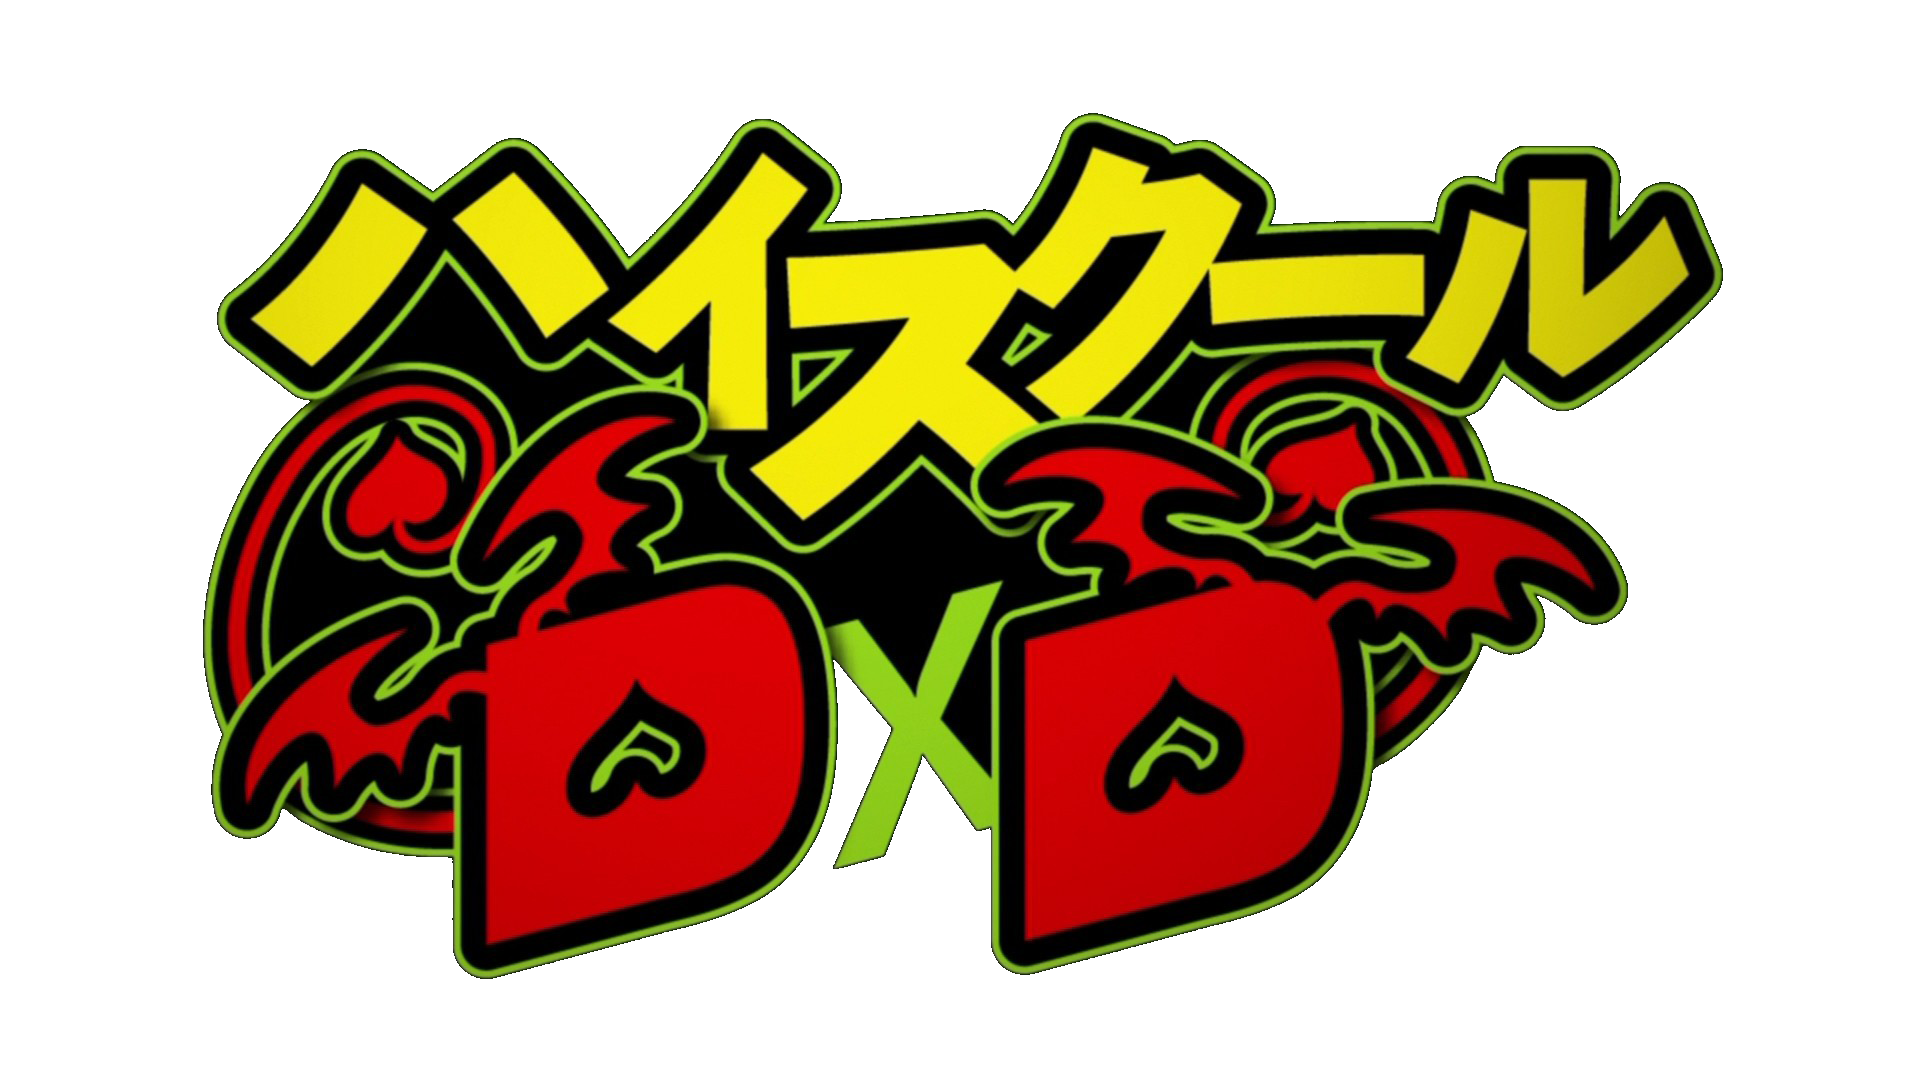 High School DXD Season 5 Release Window, Cast, Plot, and More